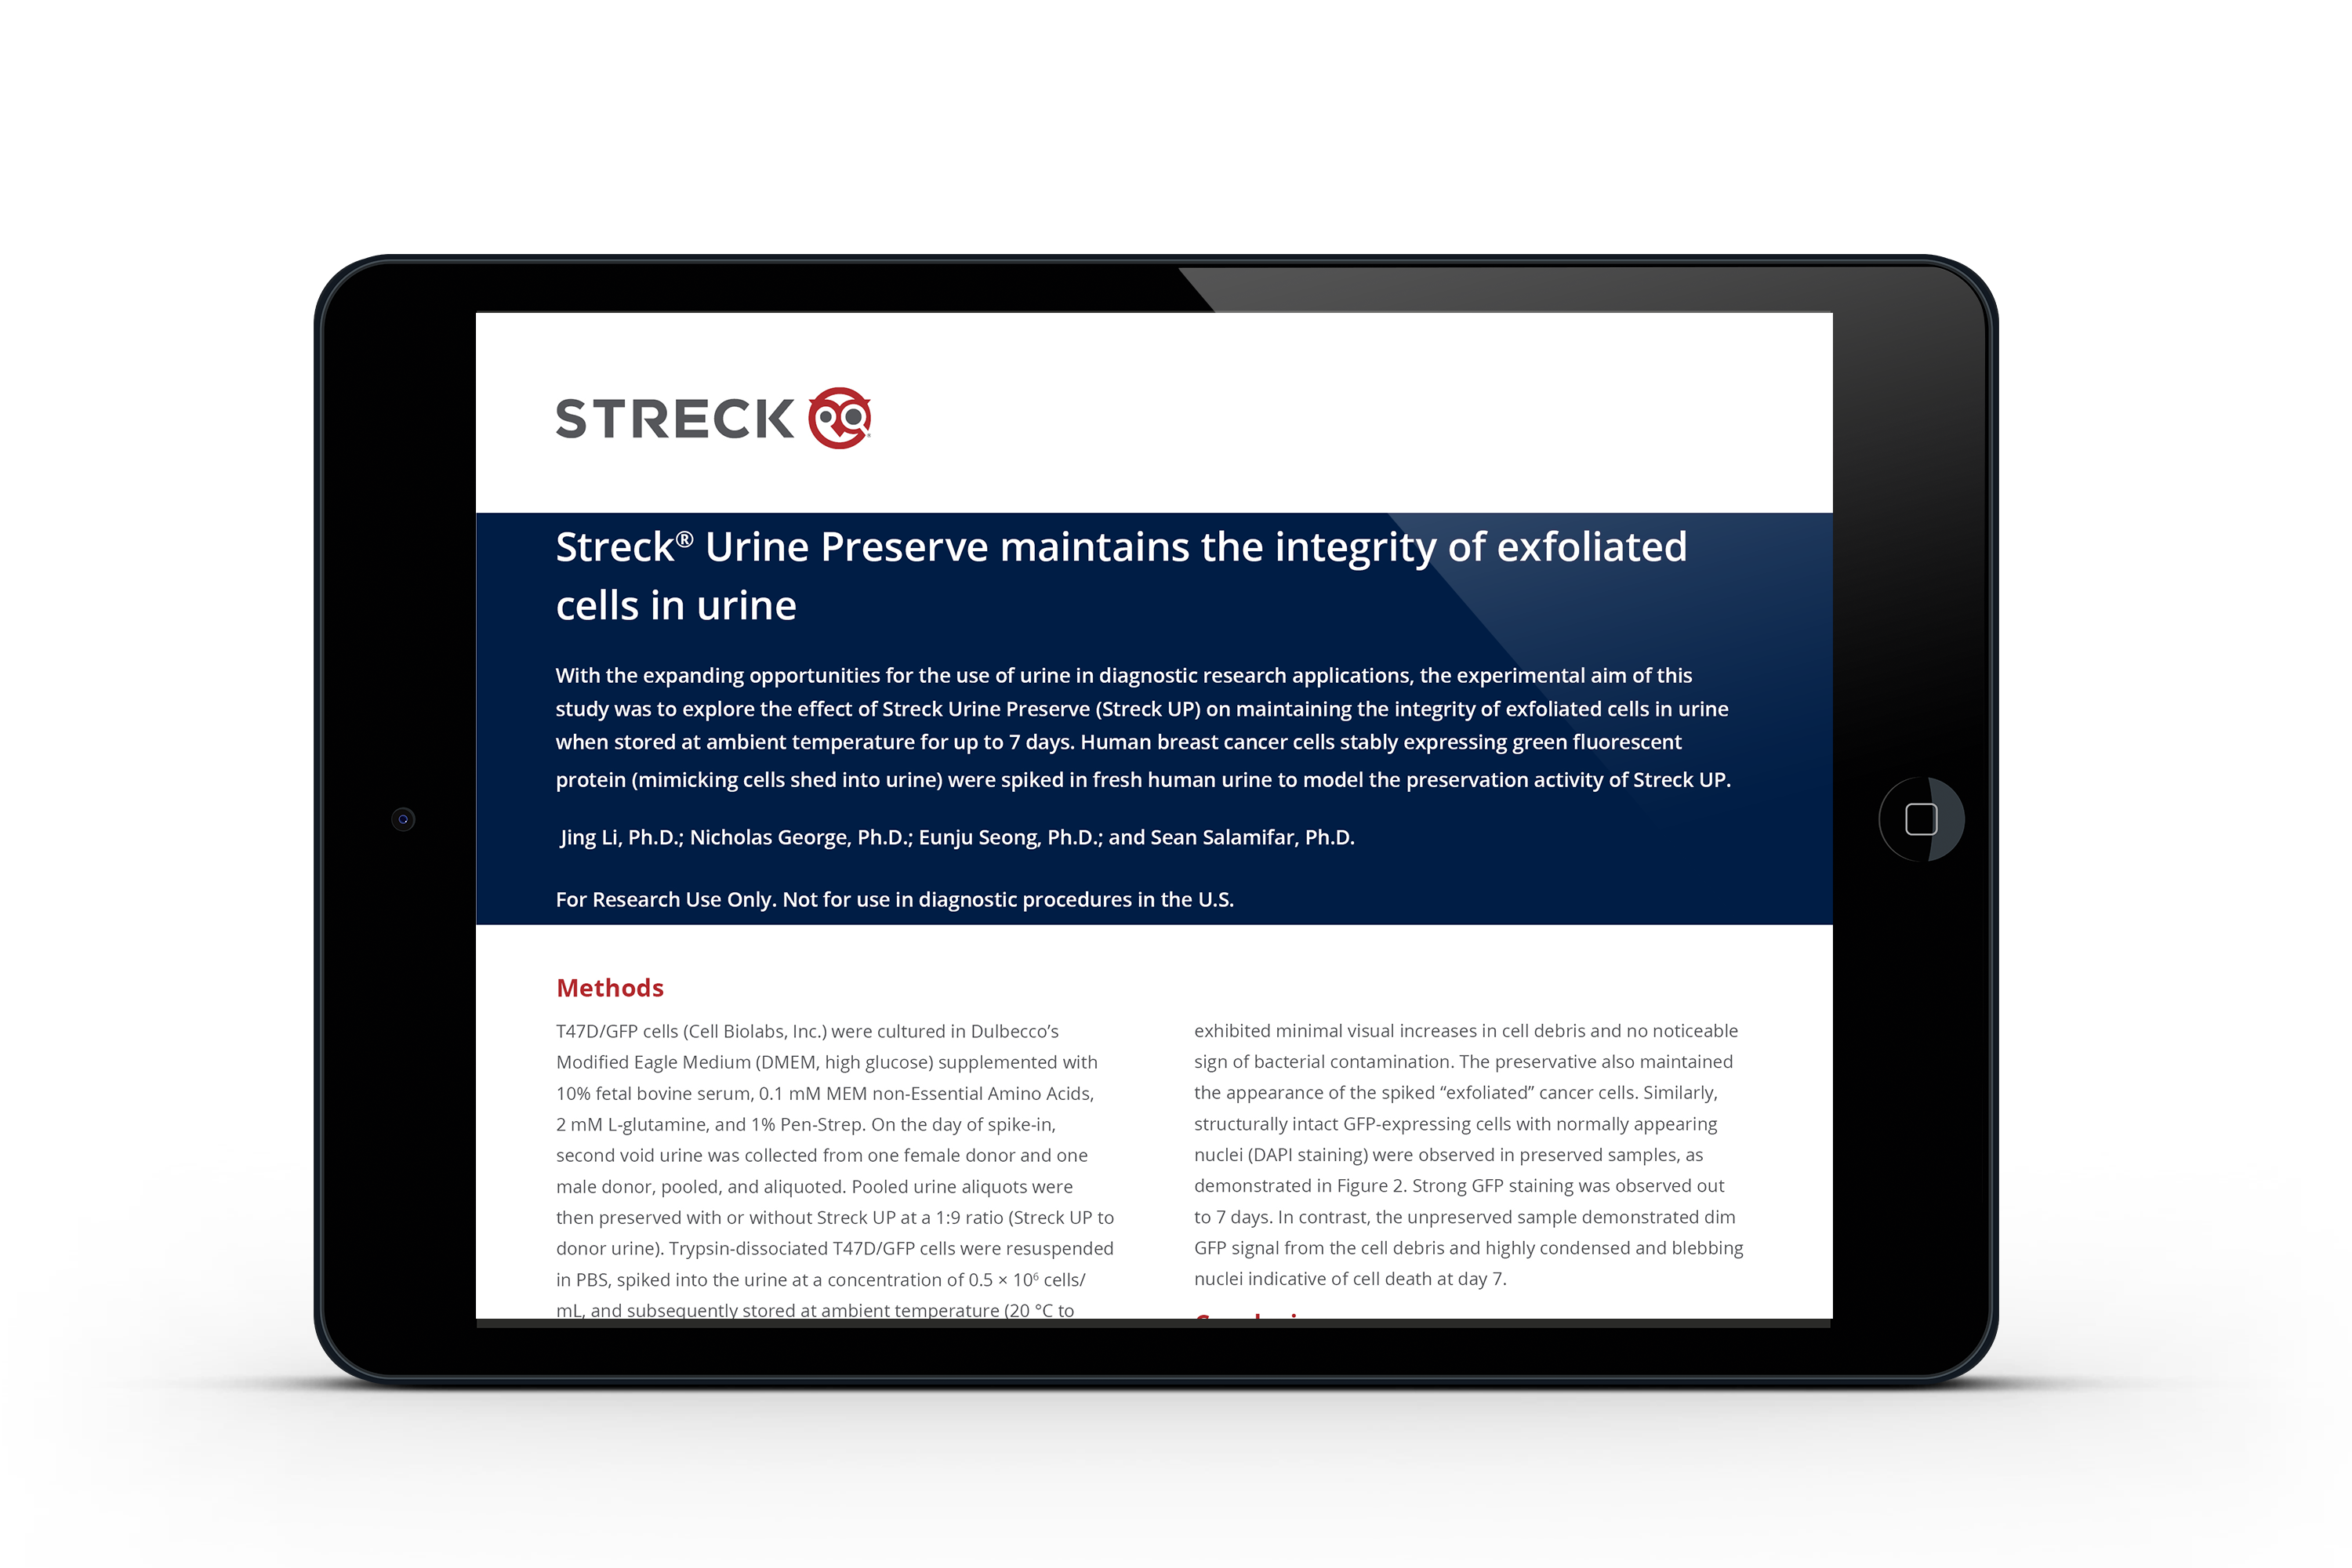 Streck Urine Preserve maintains the integrity of exfoliated cells in urine